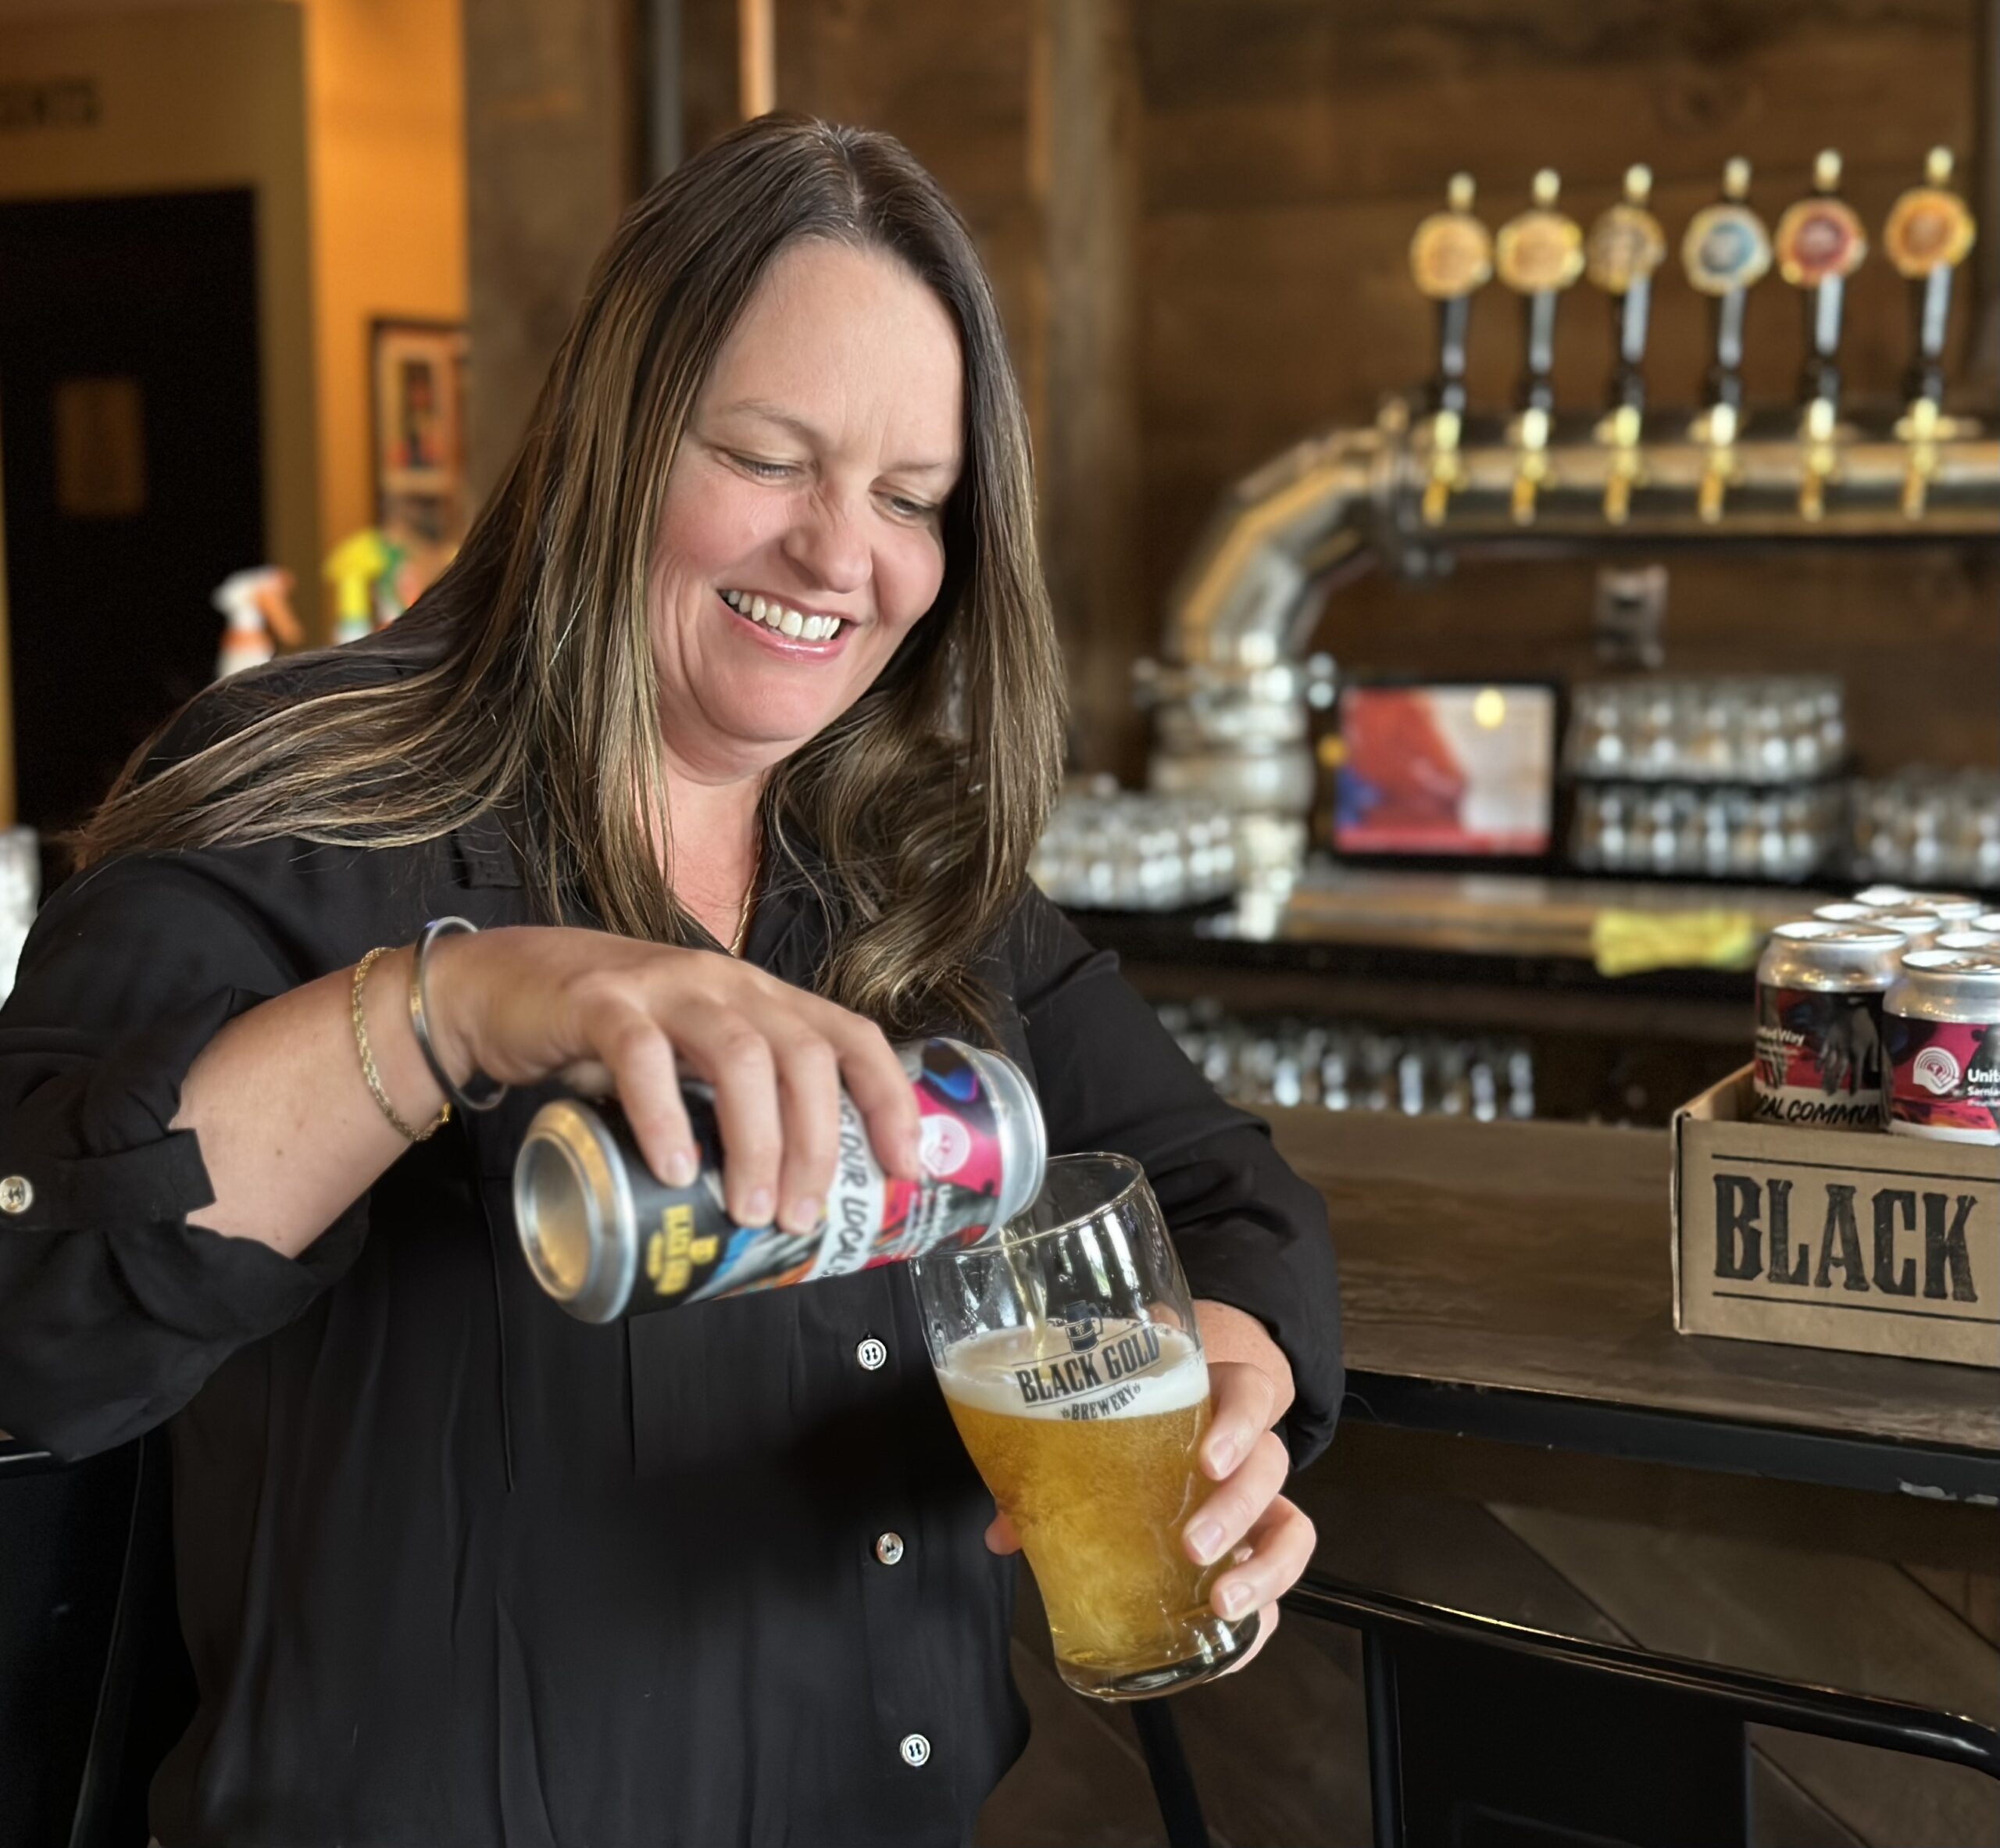 Board member Krista pours a glass of United Way branded beer at Black Gold brewery